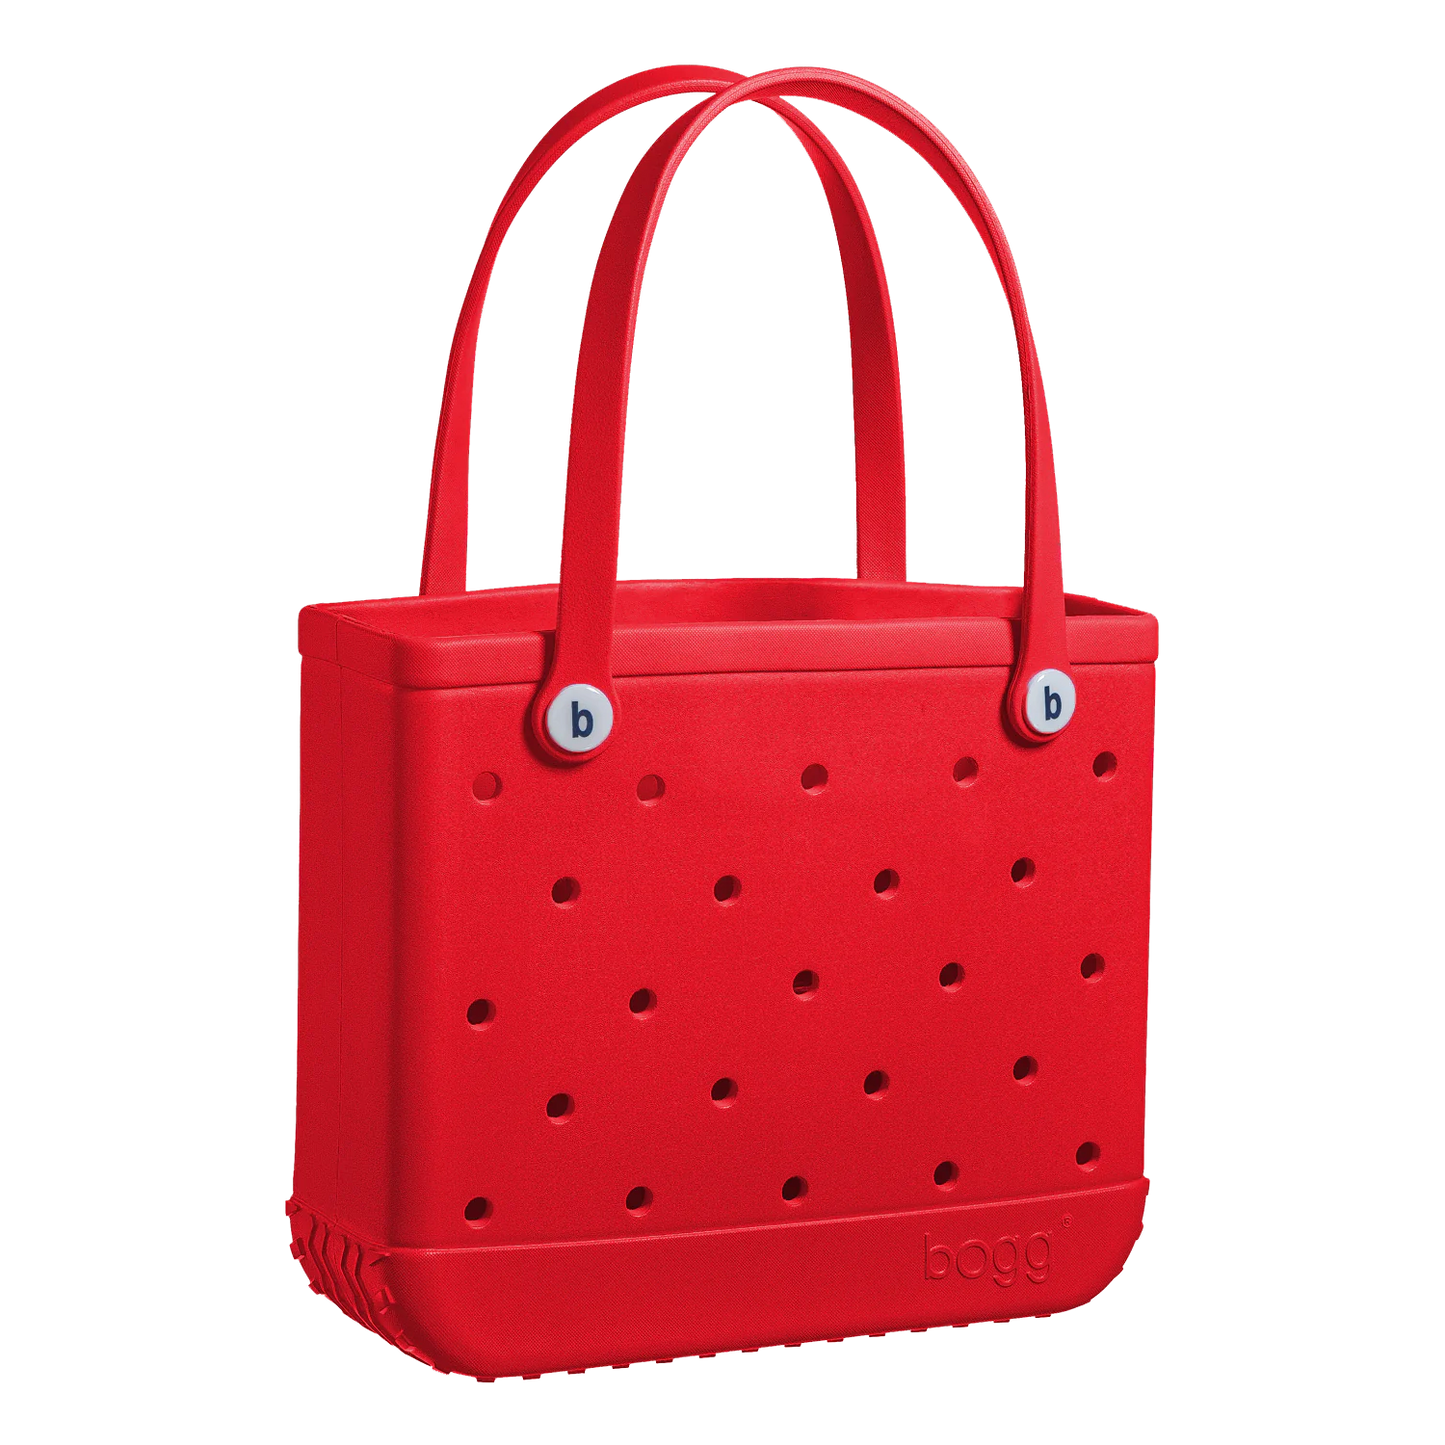 Baby Bogg® Bag - off to the races, RED